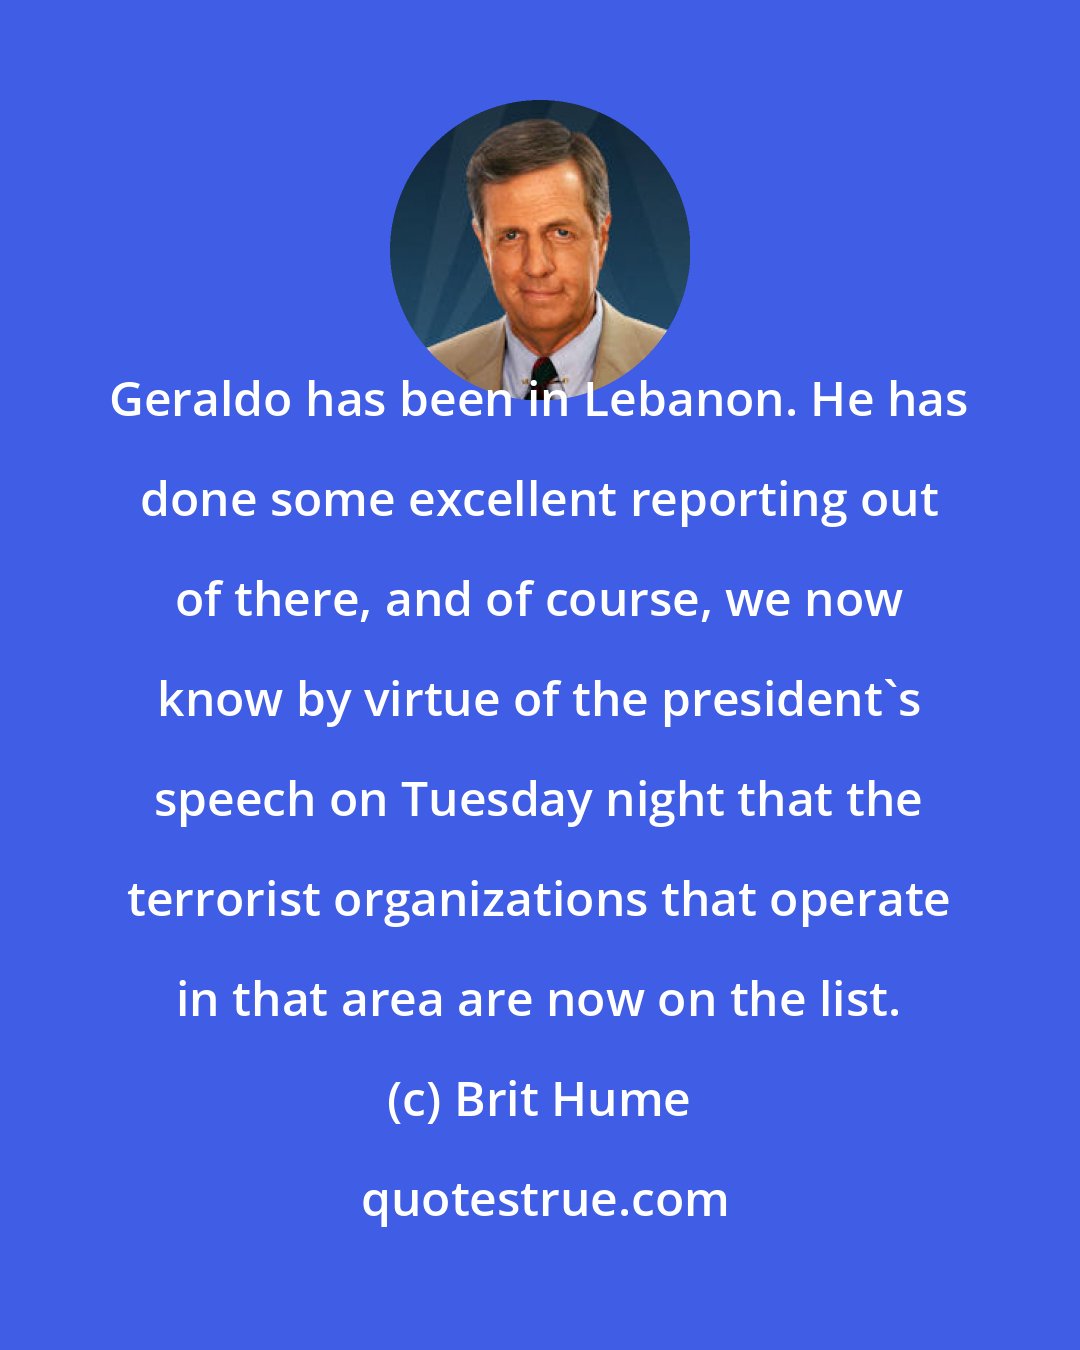 Brit Hume: Geraldo has been in Lebanon. He has done some excellent reporting out of there, and of course, we now know by virtue of the president's speech on Tuesday night that the terrorist organizations that operate in that area are now on the list.